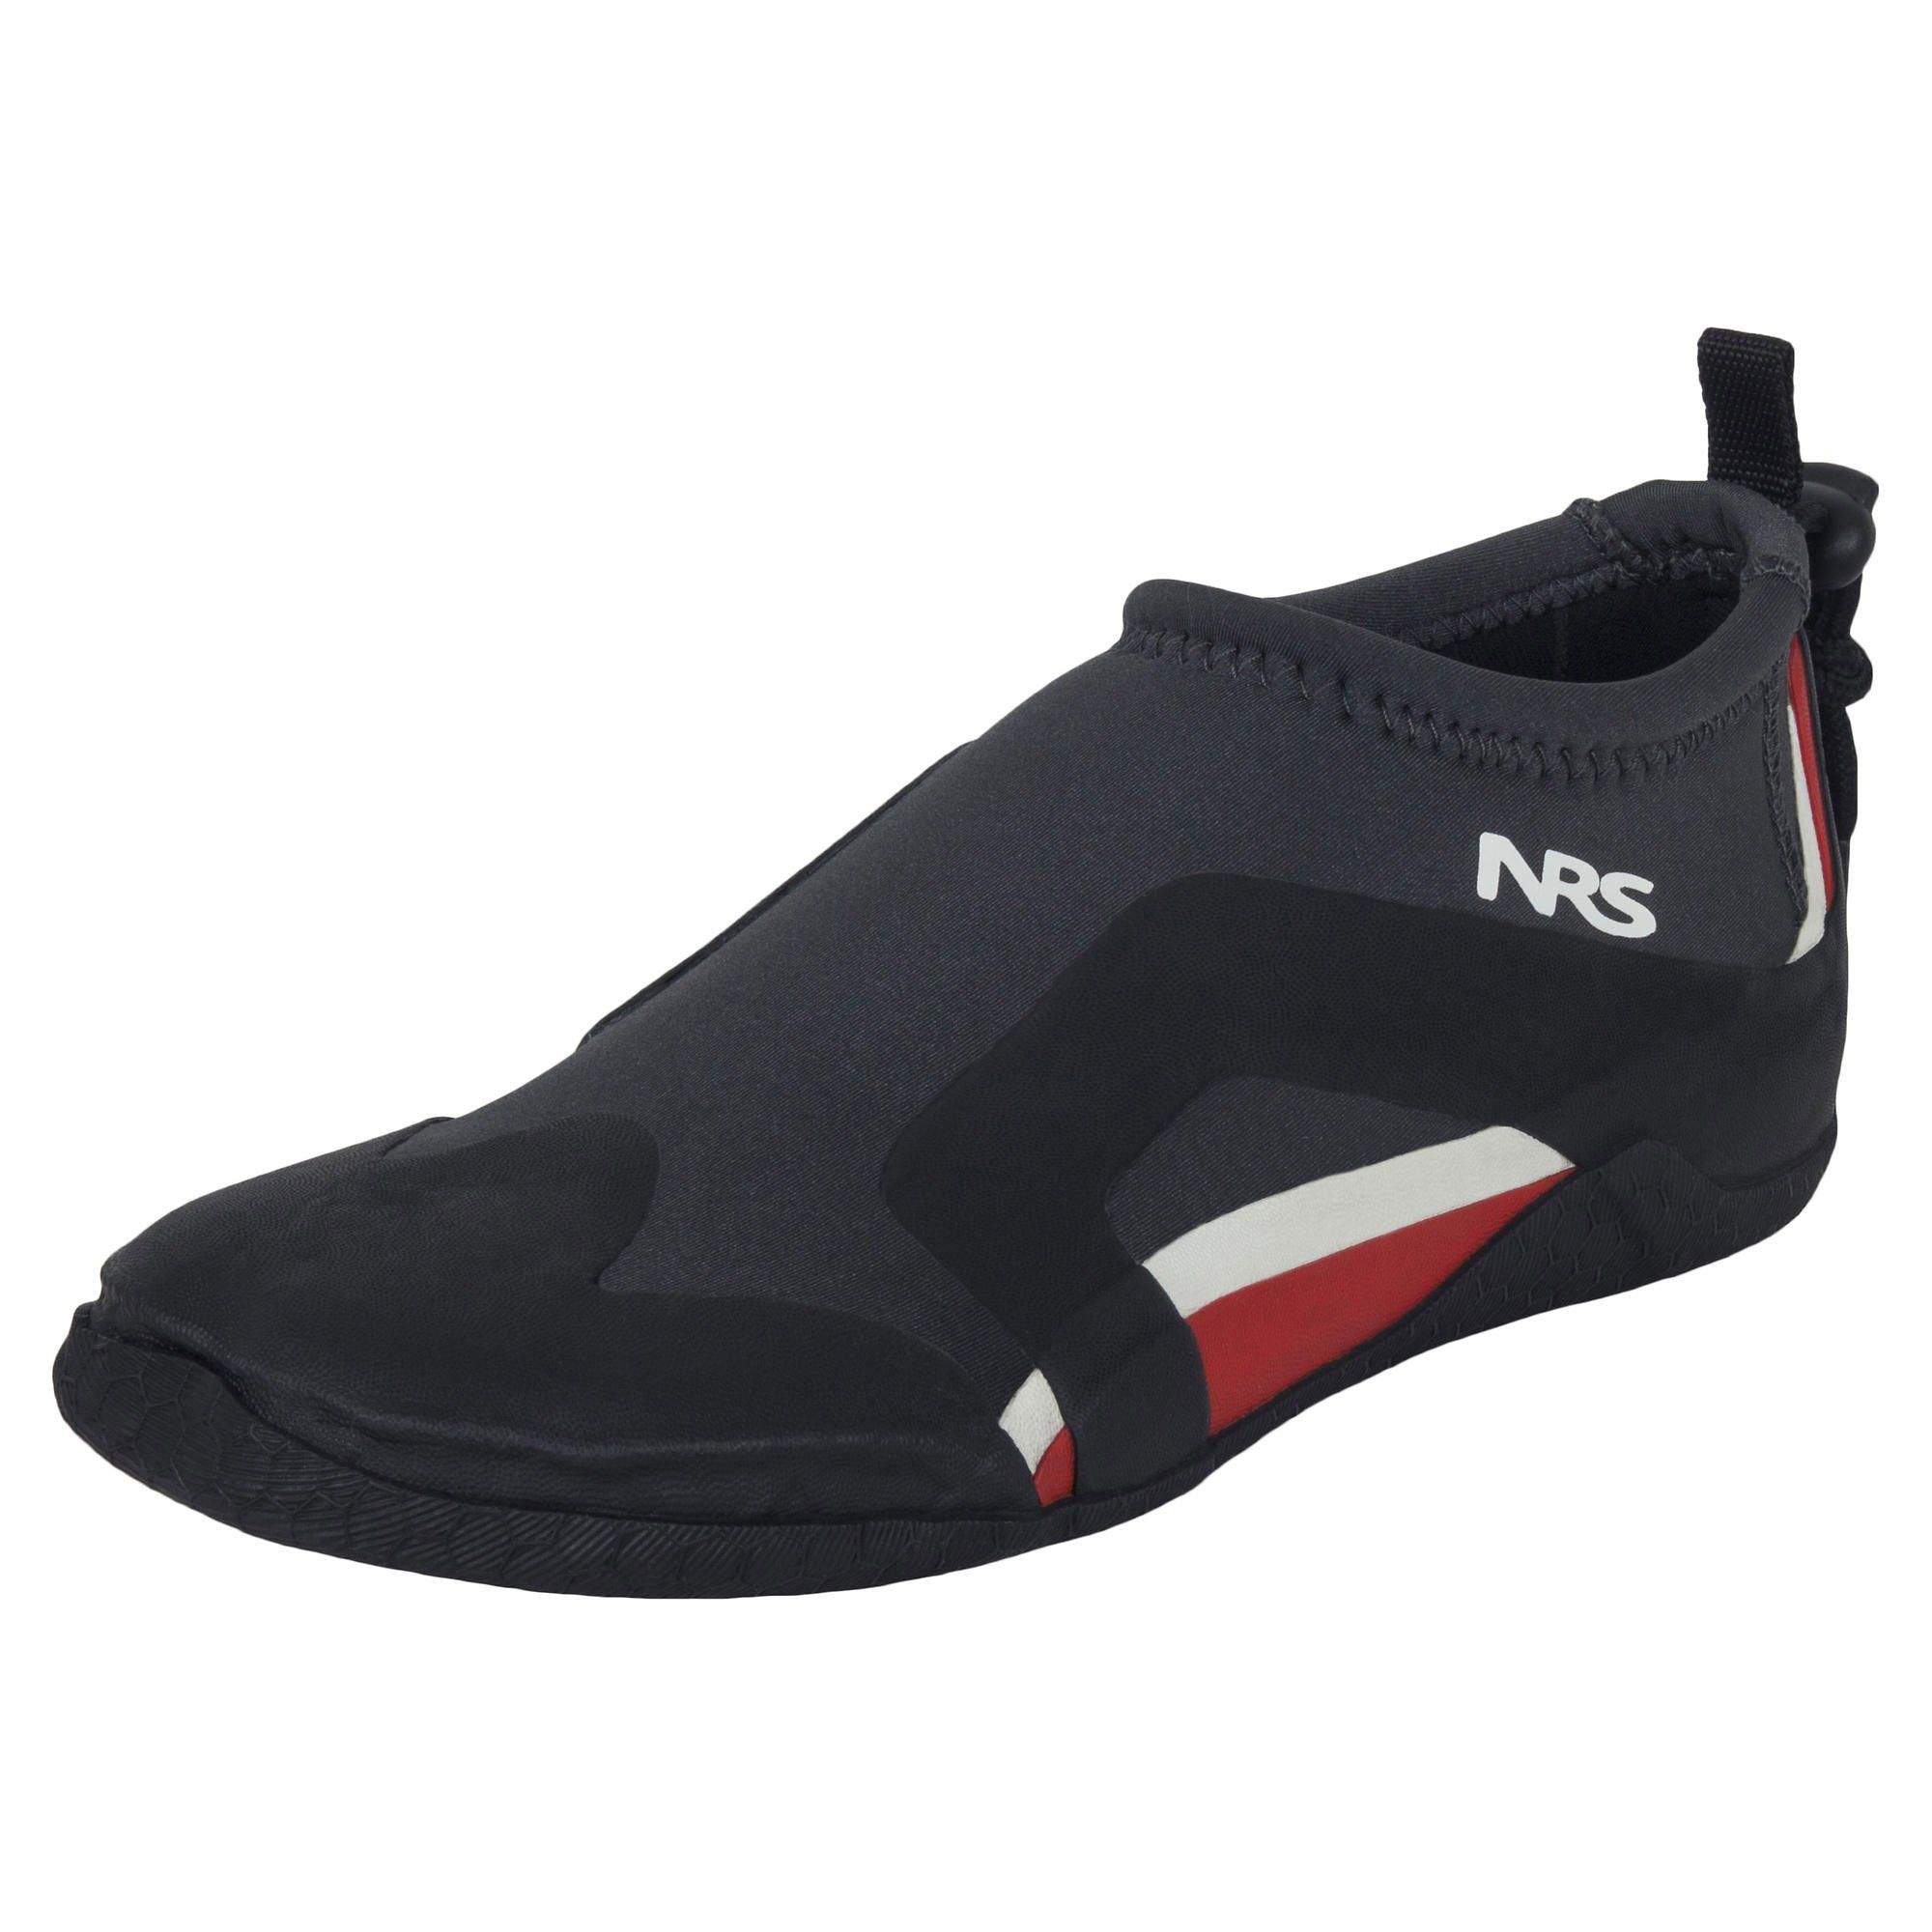 NRS Kinetic Water Shoes-Black/Red-12